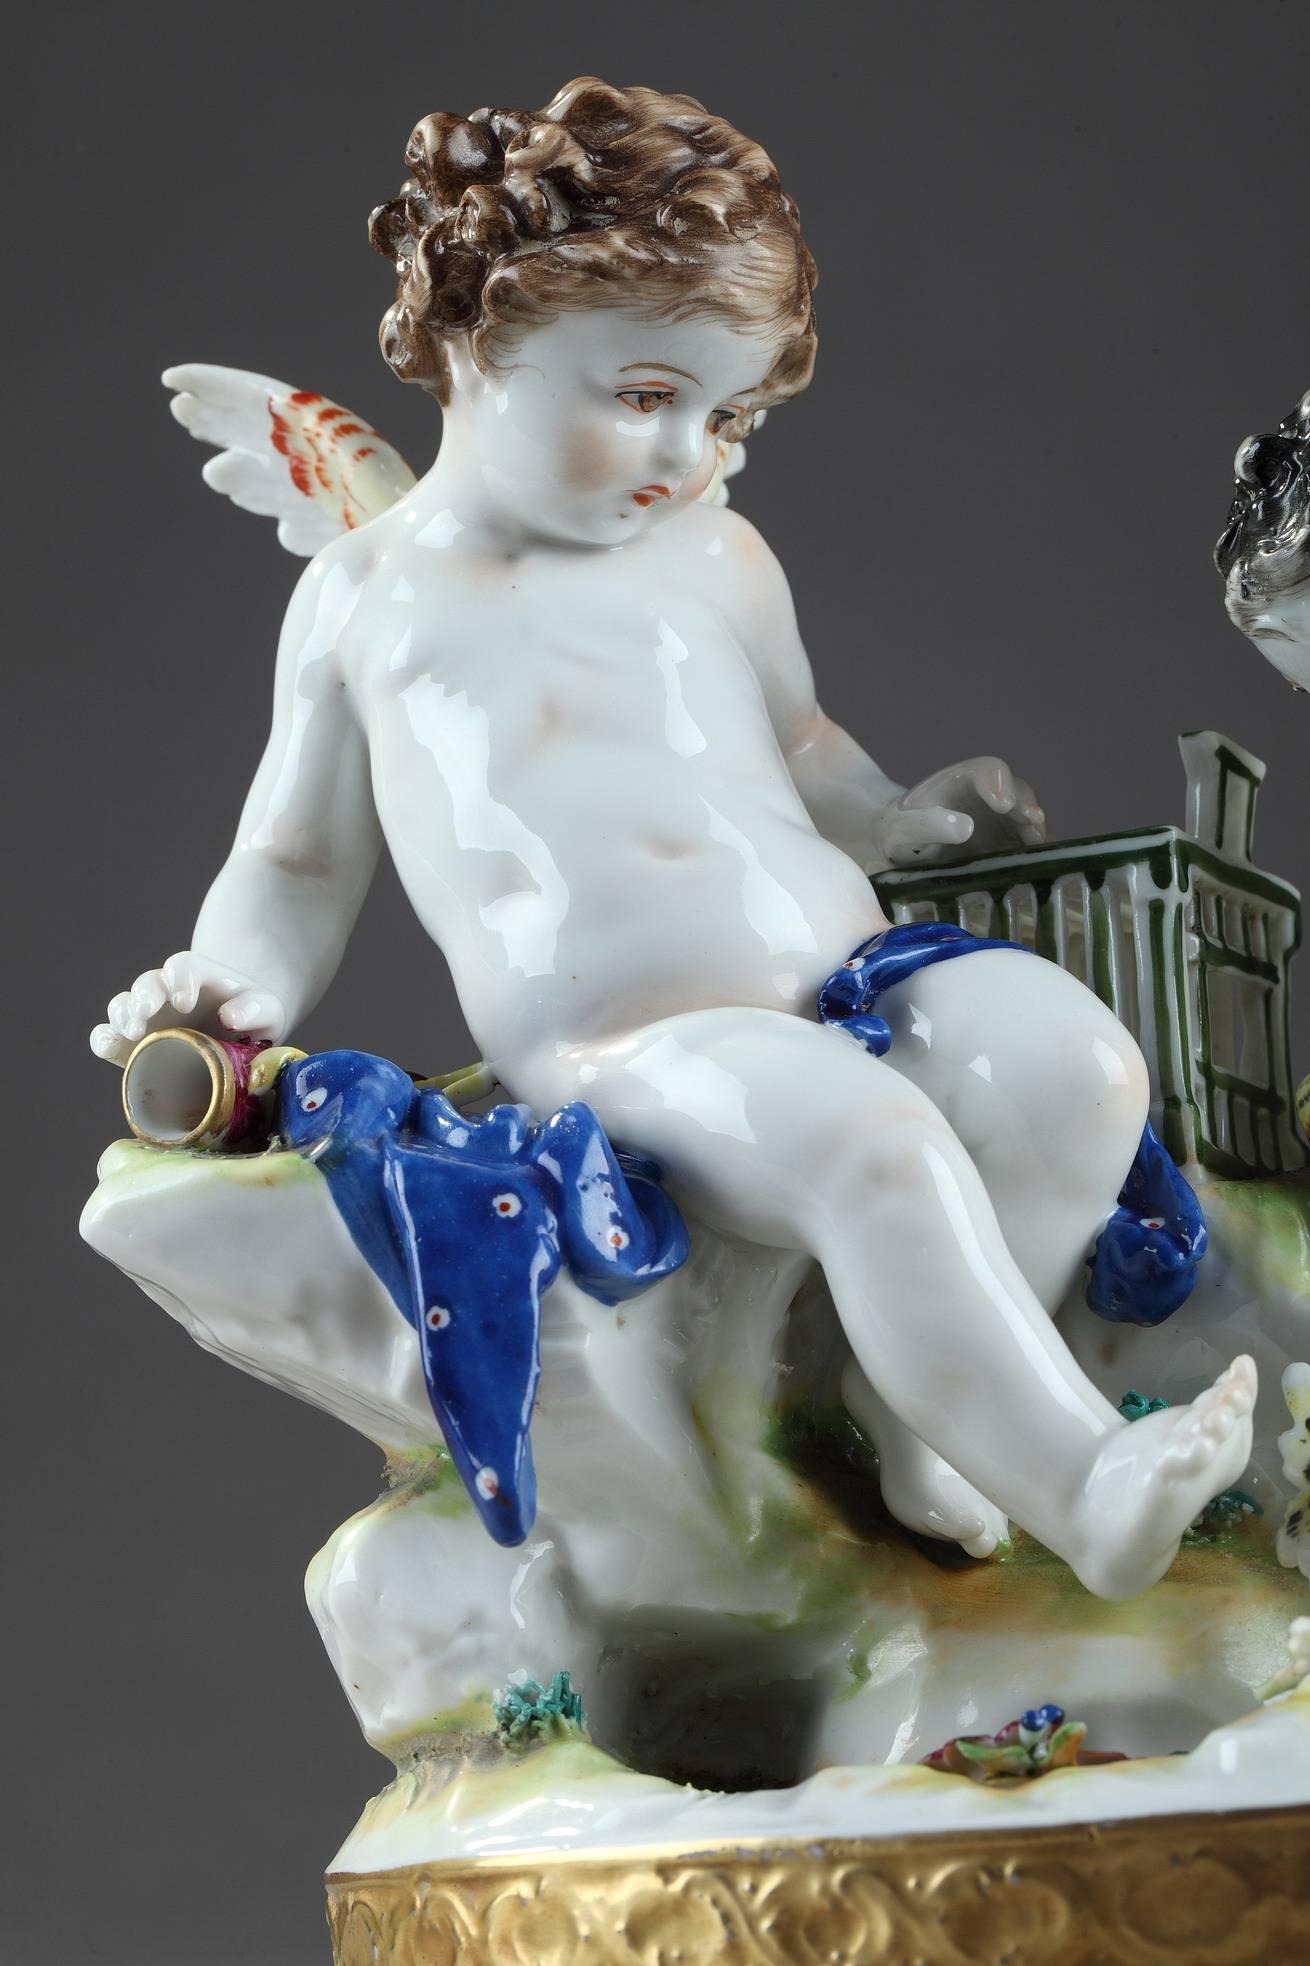 Two Ludwigsburg (Germany, Wurtemberg) hard-paste?porcelain?groups featuring two pairs of putti cherubs playing with birds and holding bunches of grapes, near a goat. Both groups with the blue crowned interlaced C mark of Ludwigsburg Porcelain